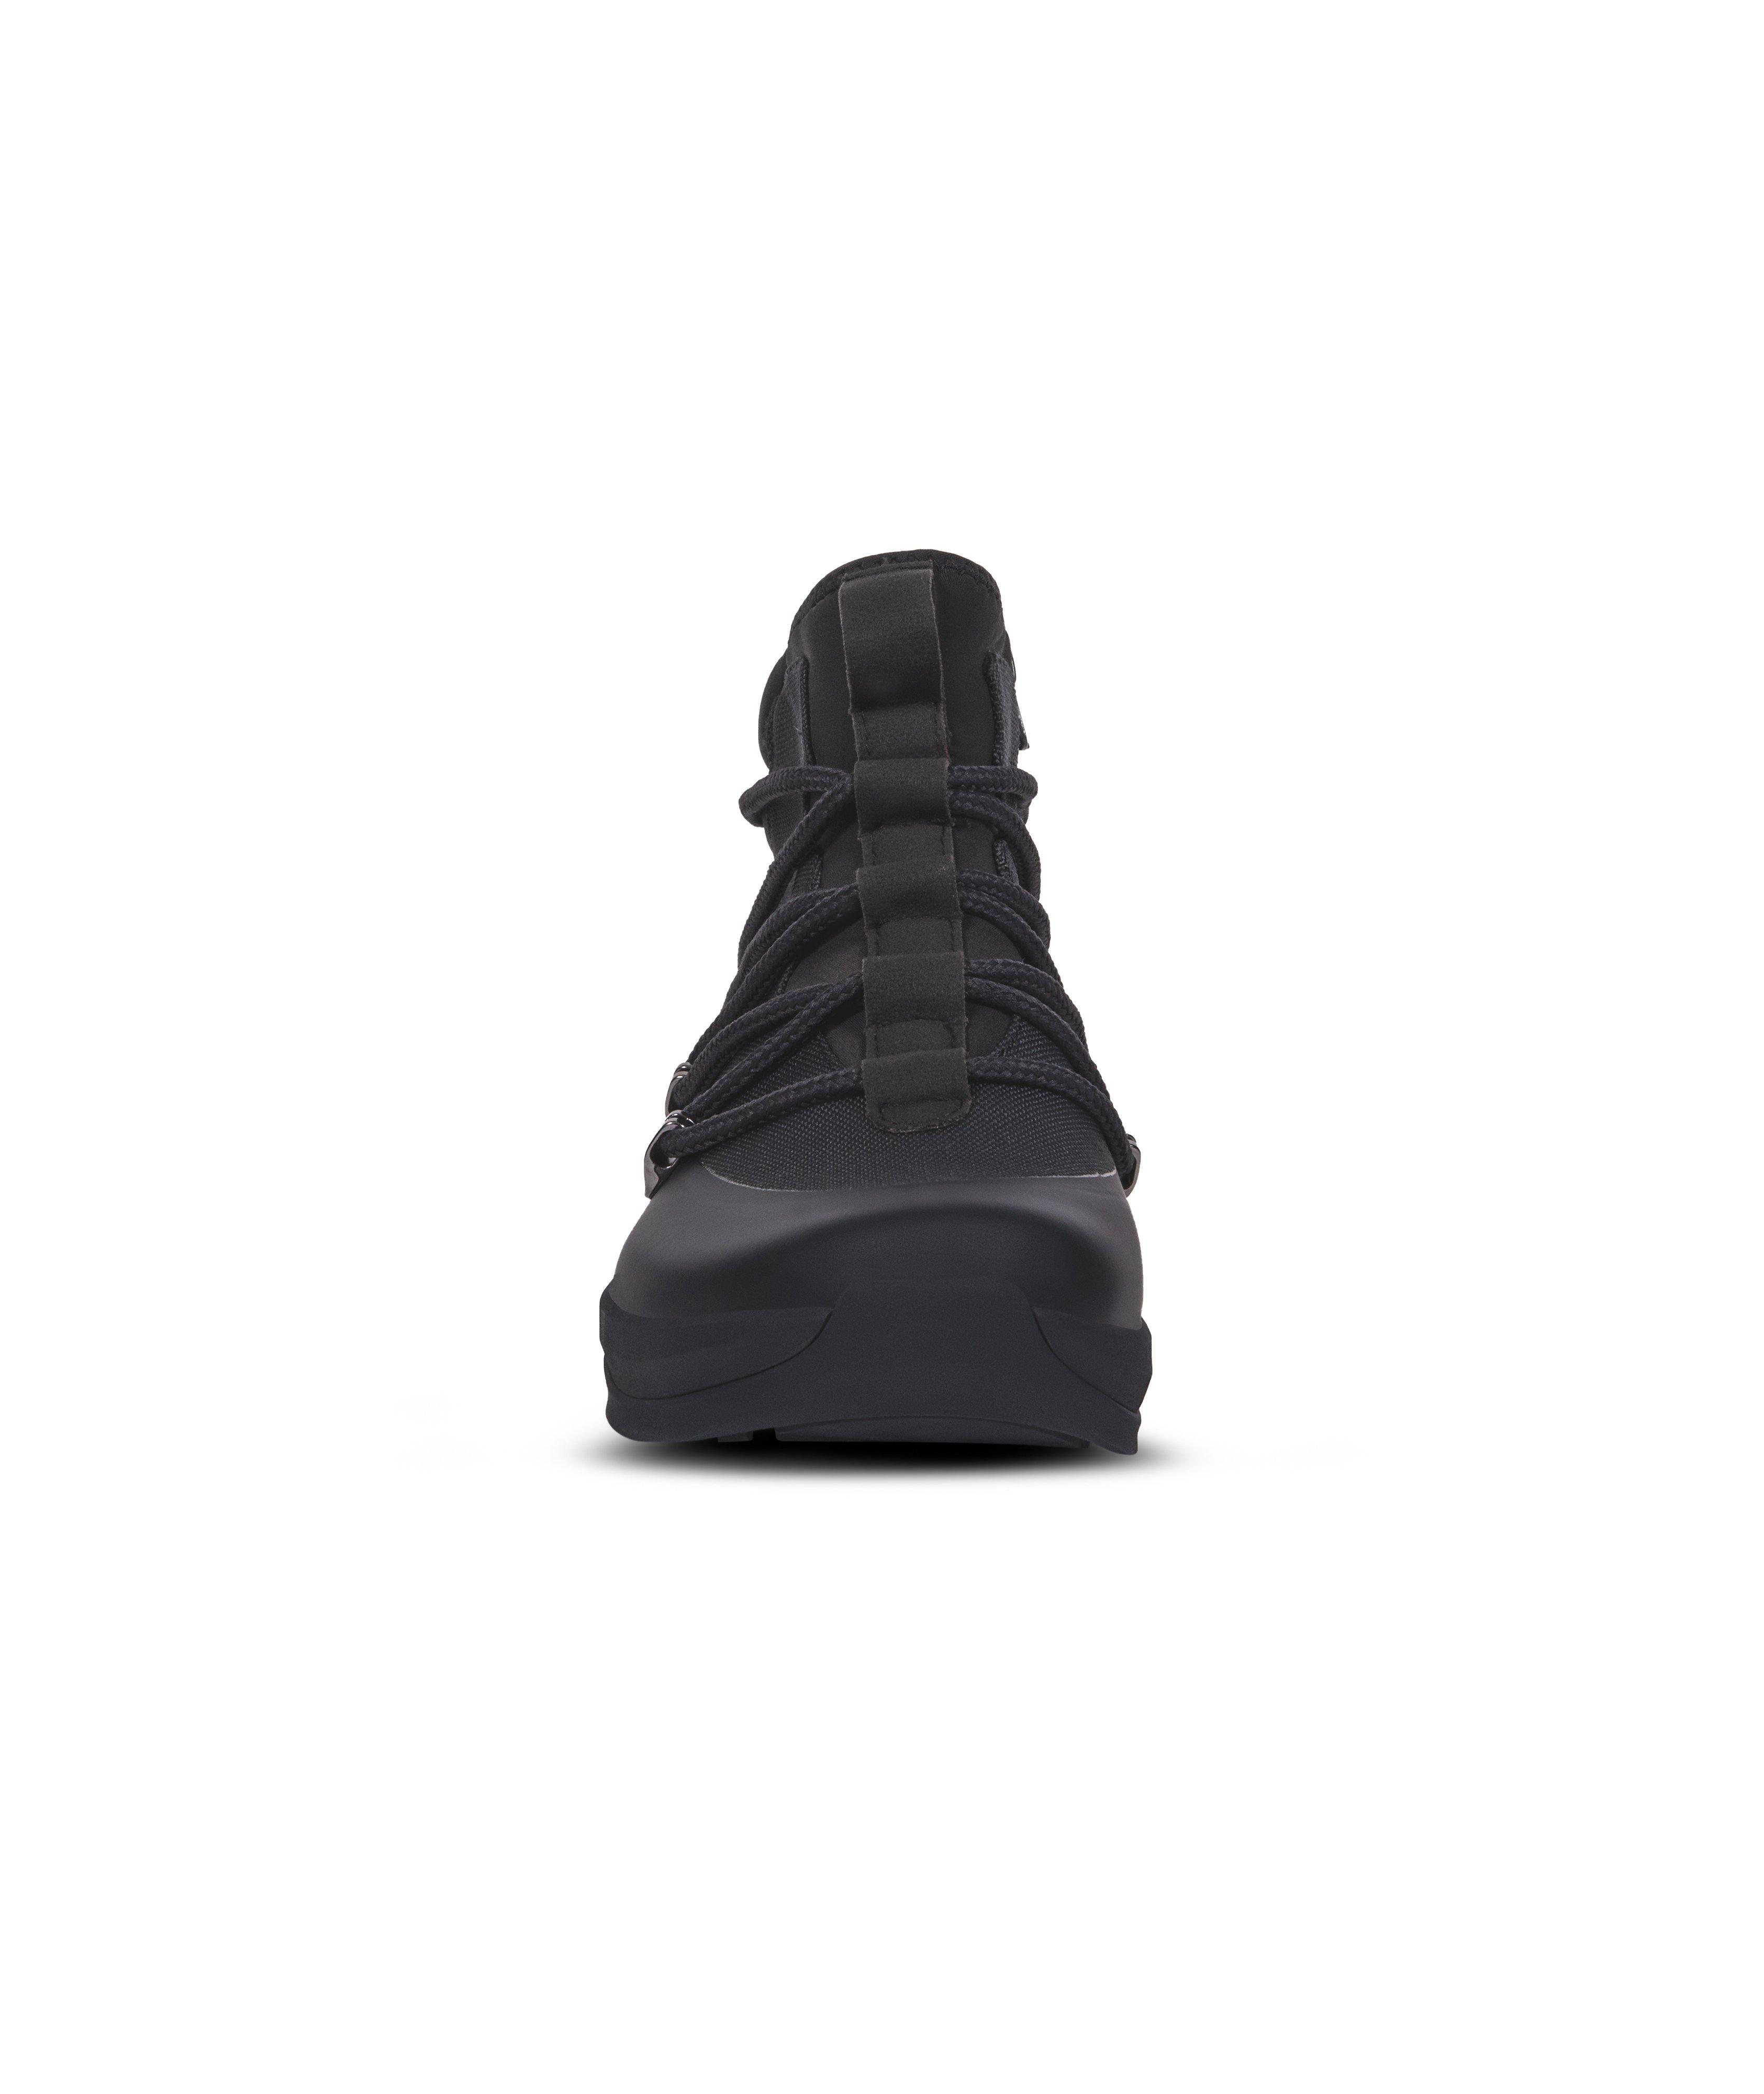 The Stnley High-Top Sneaker Boots image 3